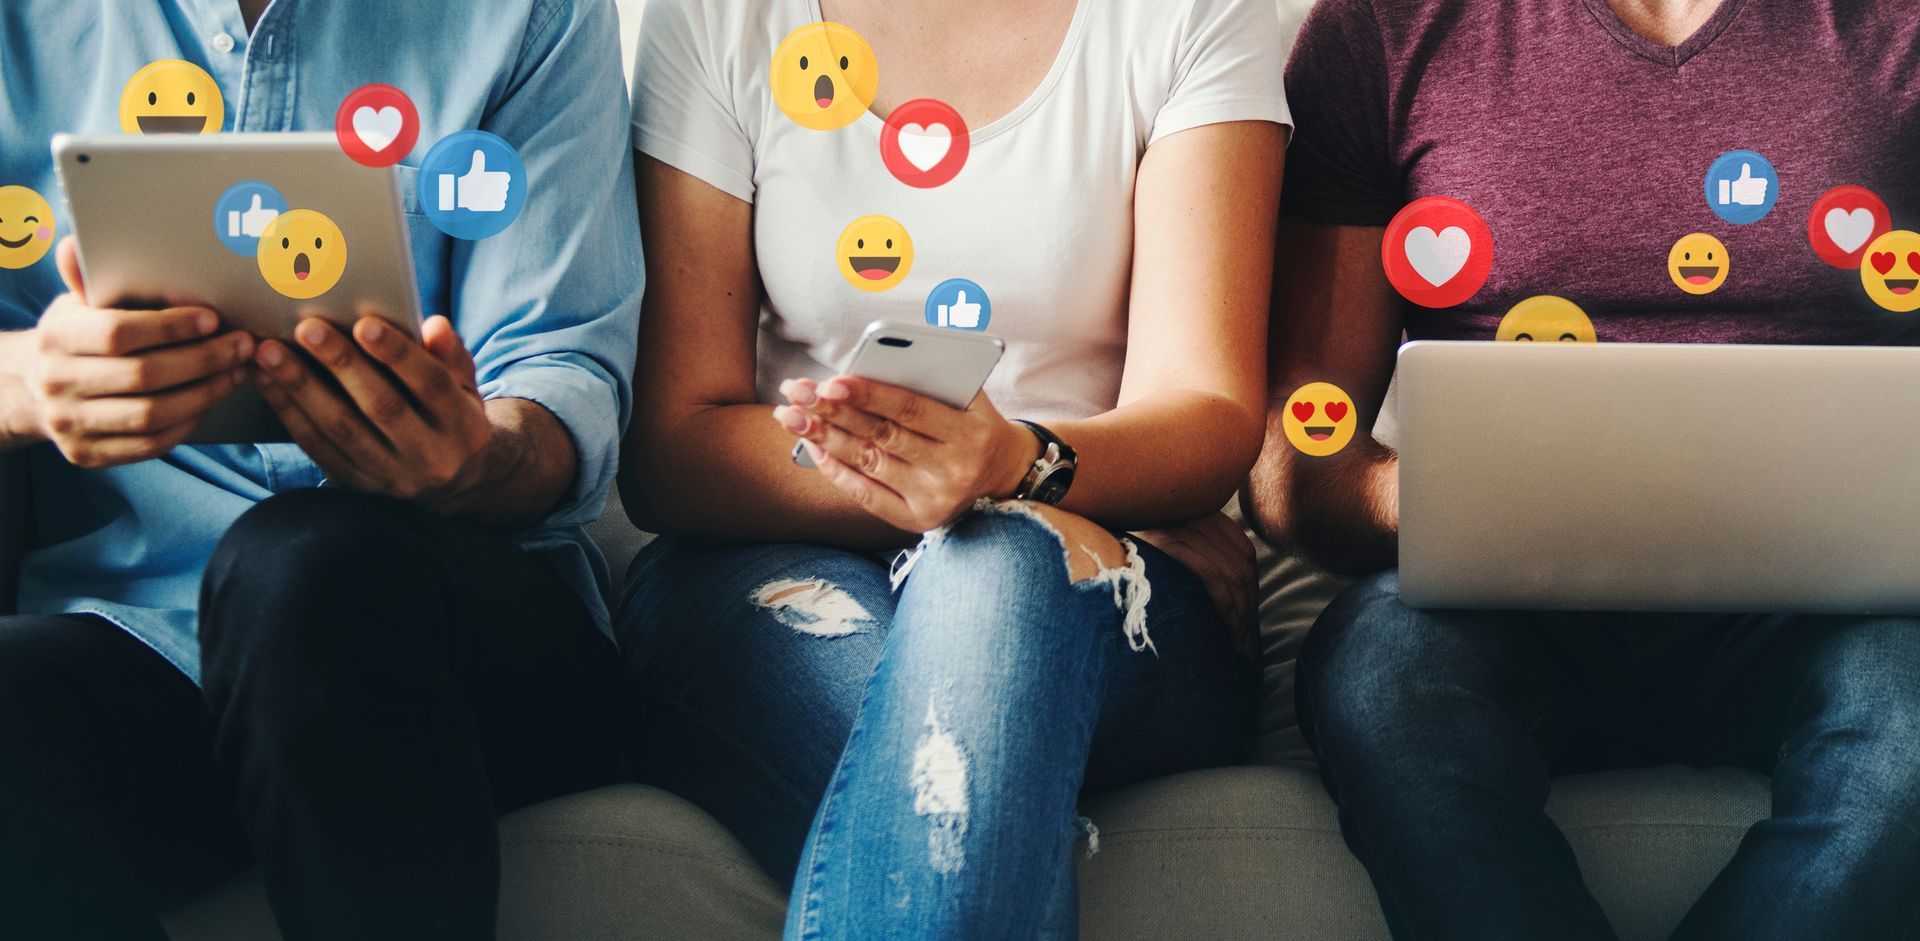 Three individuals sitting down looking at social media with emojis coming out of their phone, tablet